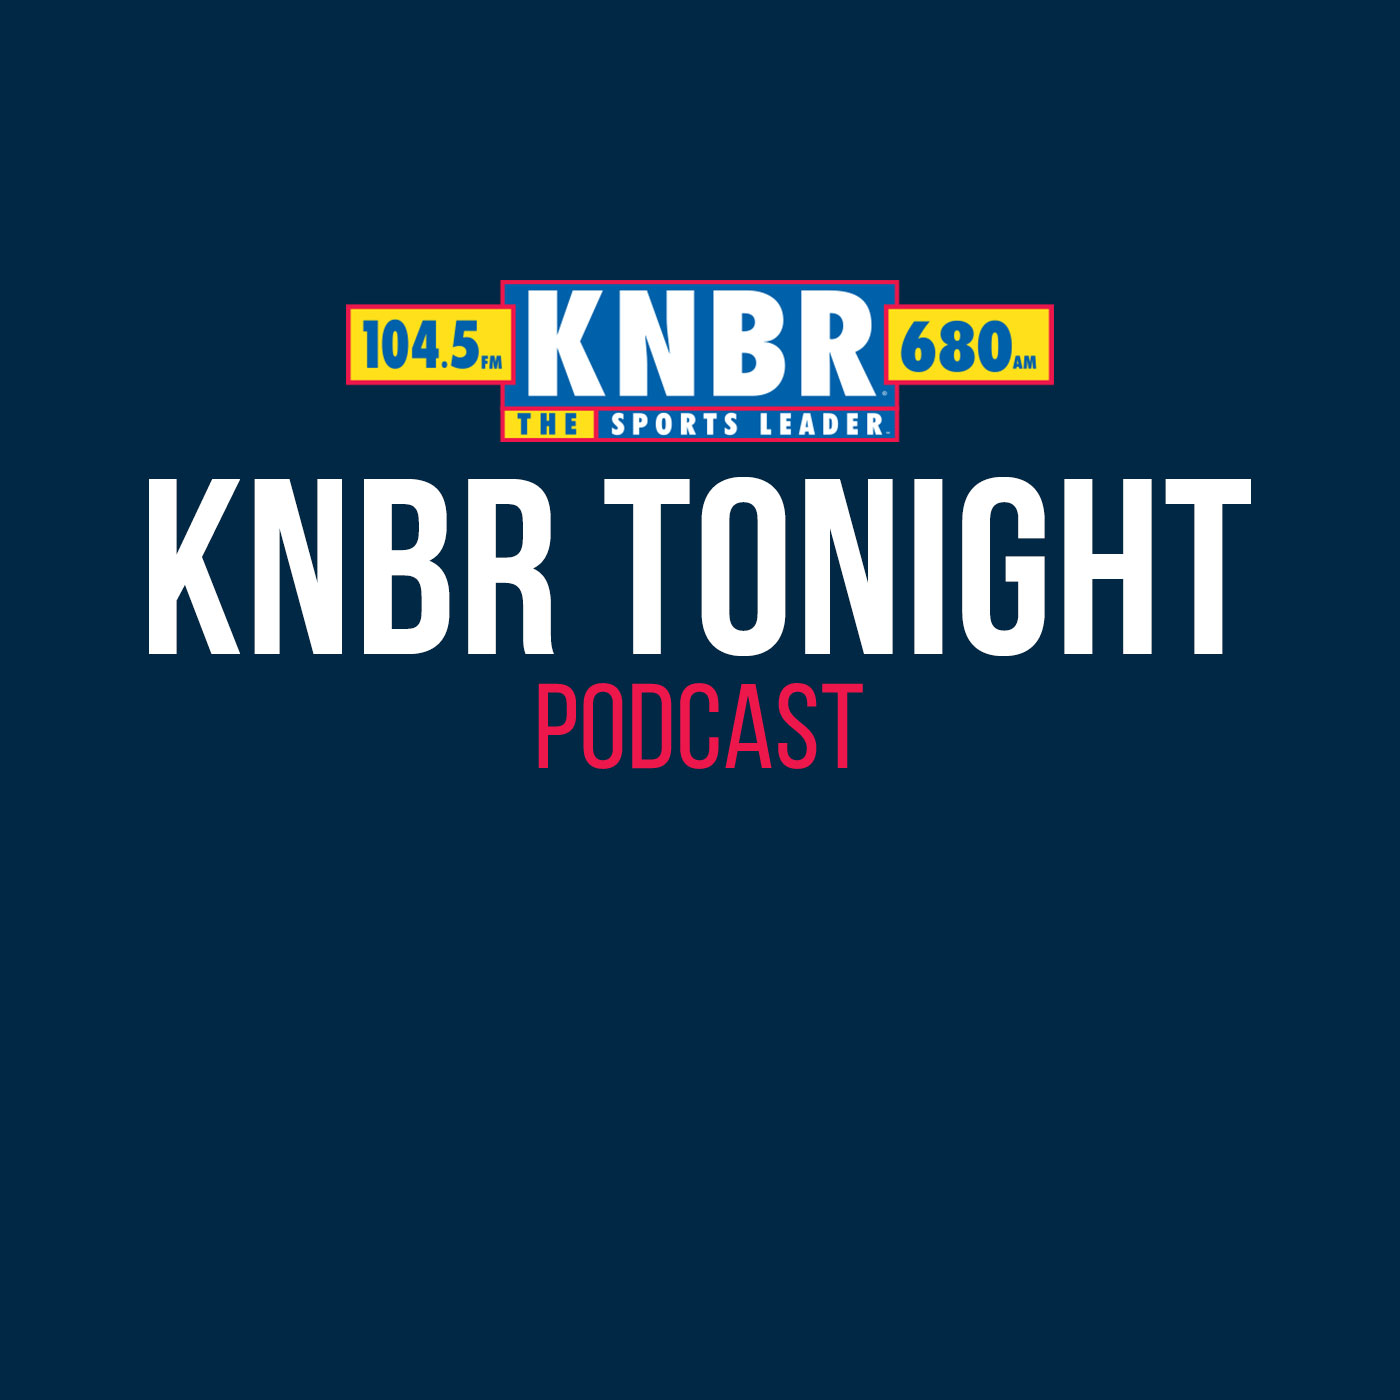 1-27 Steven Ruiz joins KNBR Tonight to discuss how Demeco Ryans influences the 49ers defense to play their best football when it matters most and how that is a main characteristic why he may be in line for a Head Coach job in the NFL